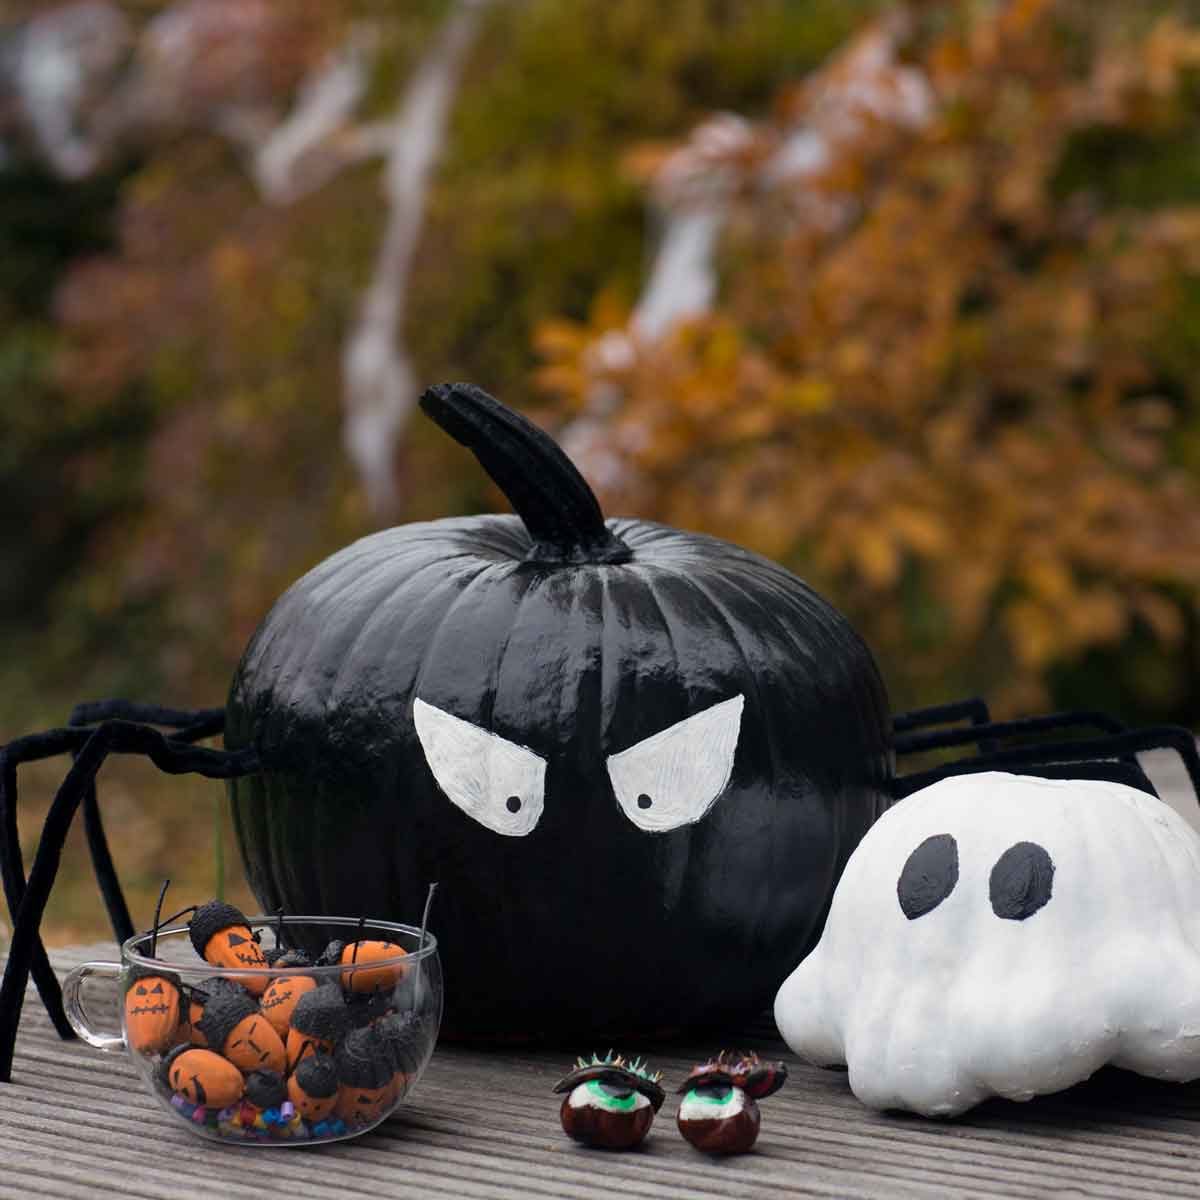 16 Cool Painted Pumpkins To Diy For Halloween | Family Handyman